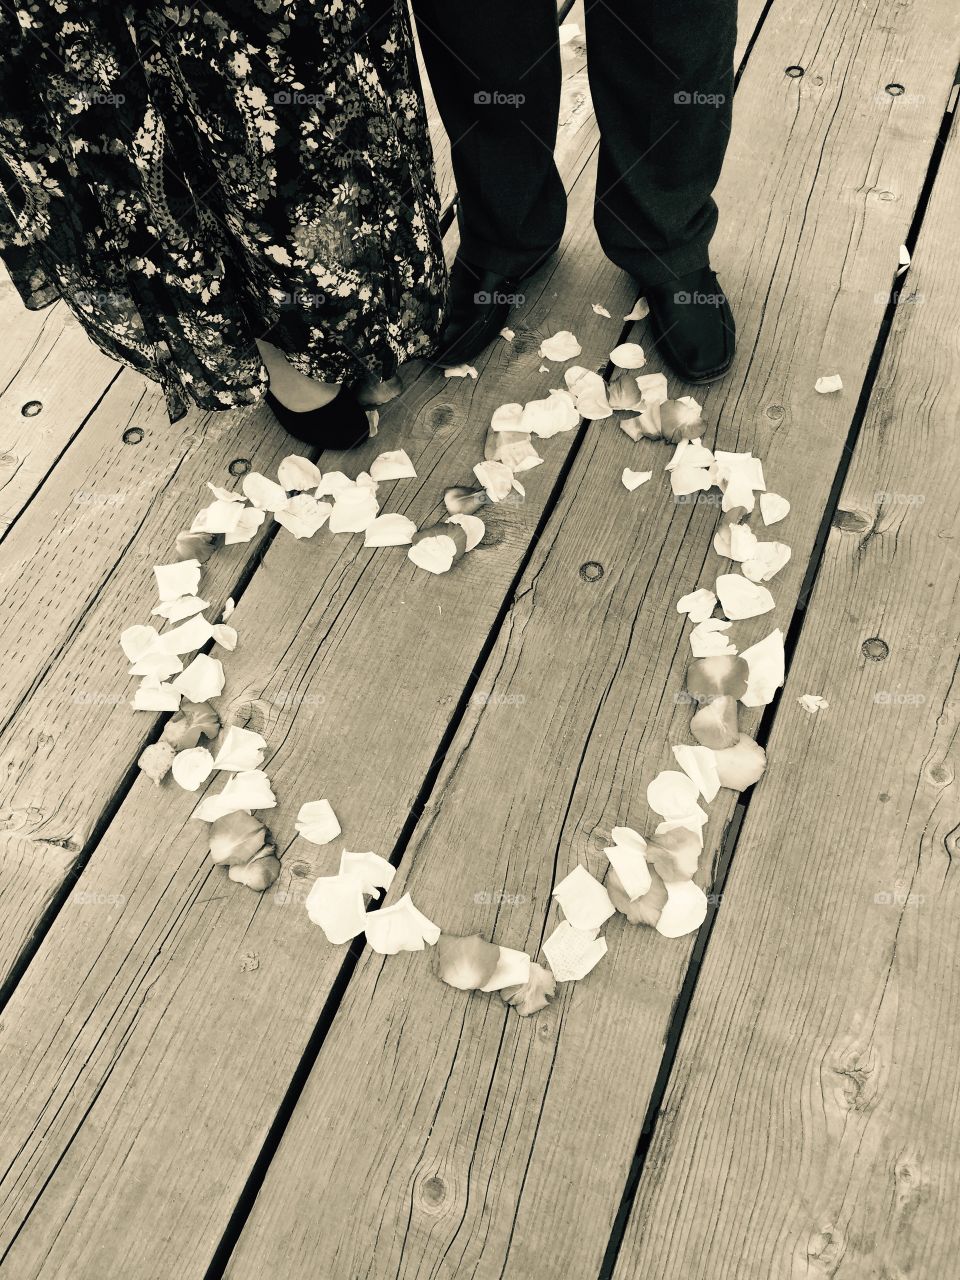 First steps as Husband and Wife through this beautiful heart made of rose petals. My new sister in law was pregnant at the time in this simple autumnal ceremony at the end of the boardwalk